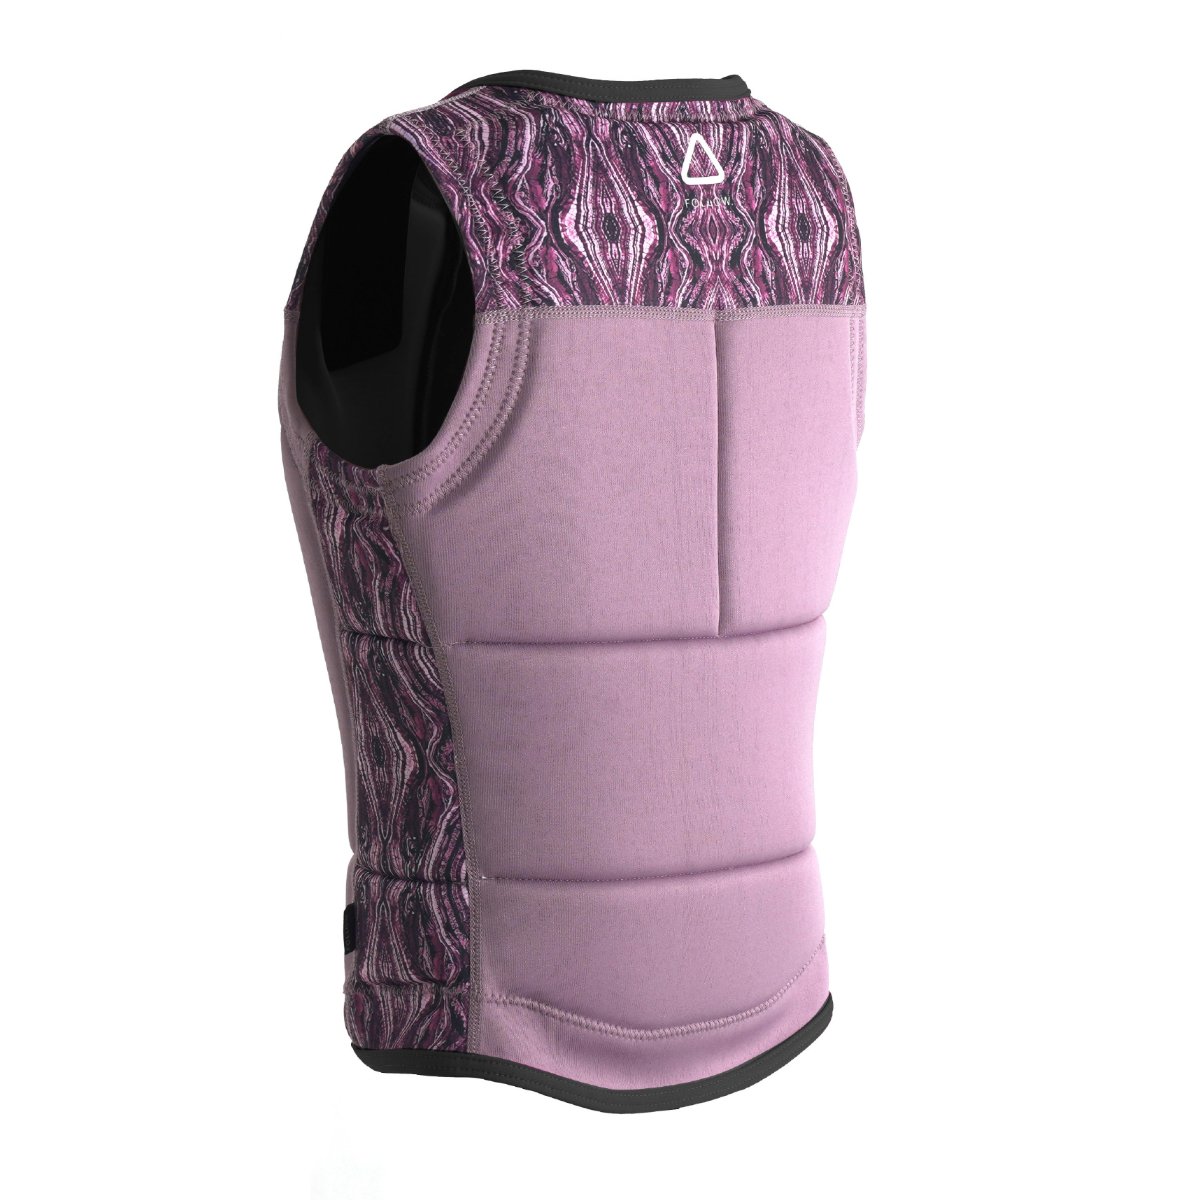 Follow Harmony Ladies Comp Wake Vest in Orchid